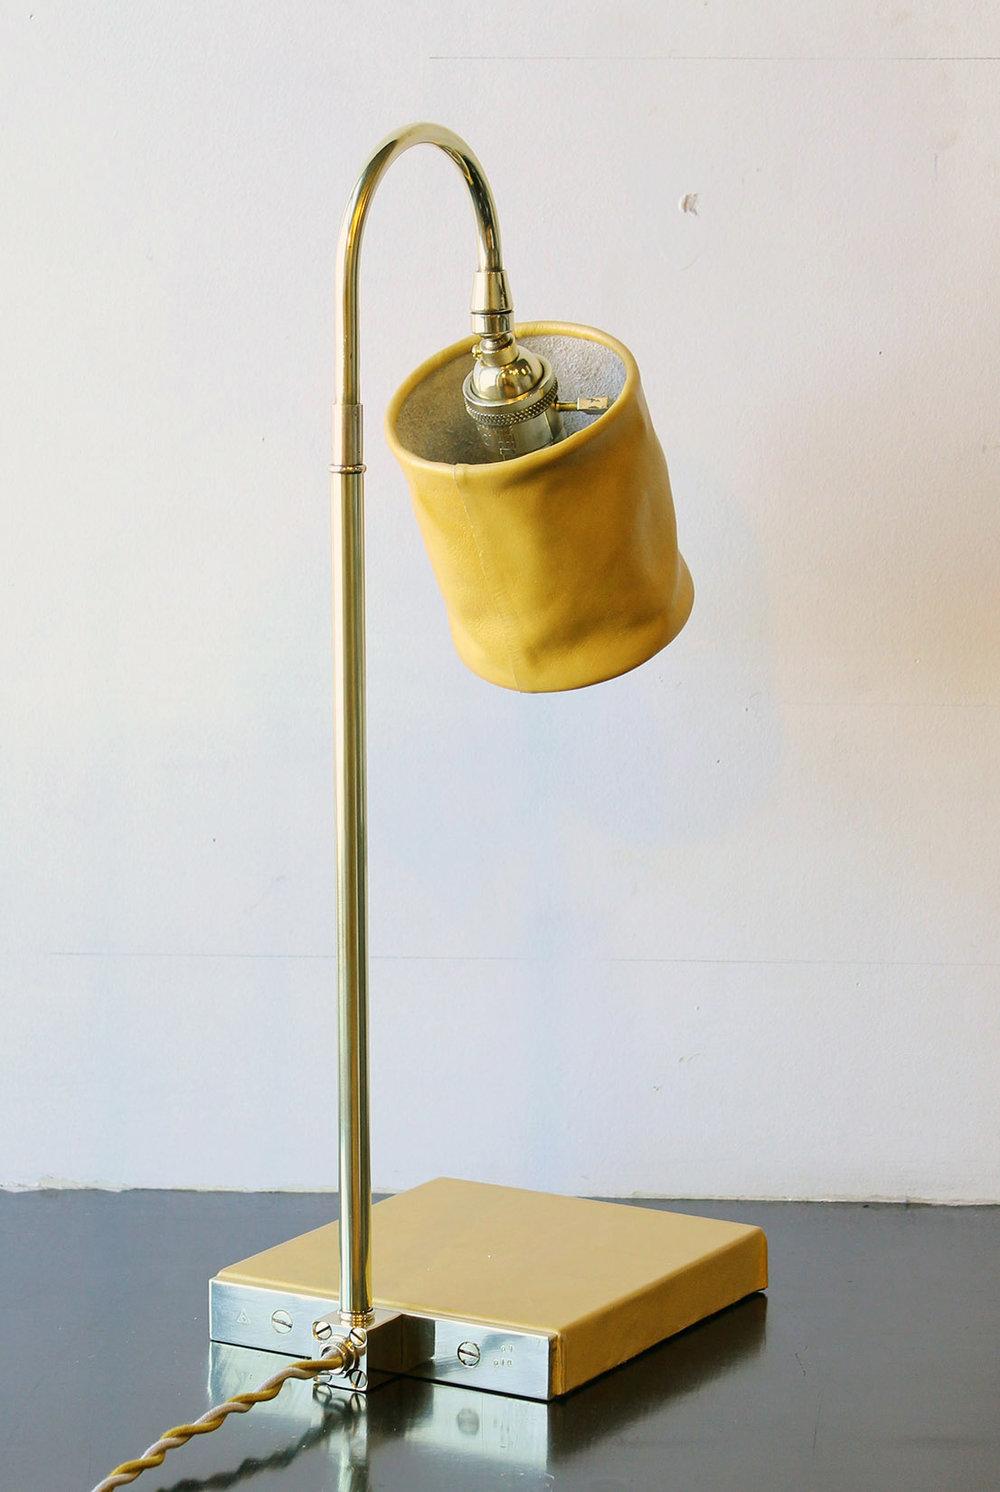 Solid machined brass in polished un-lacquered finish, hand-dyed and waxed leather wrapped wood, soft unstructured pivoting leather shade, hand-dyed braided cotton cord. All material finishes are living finishes: they will change and patina for the